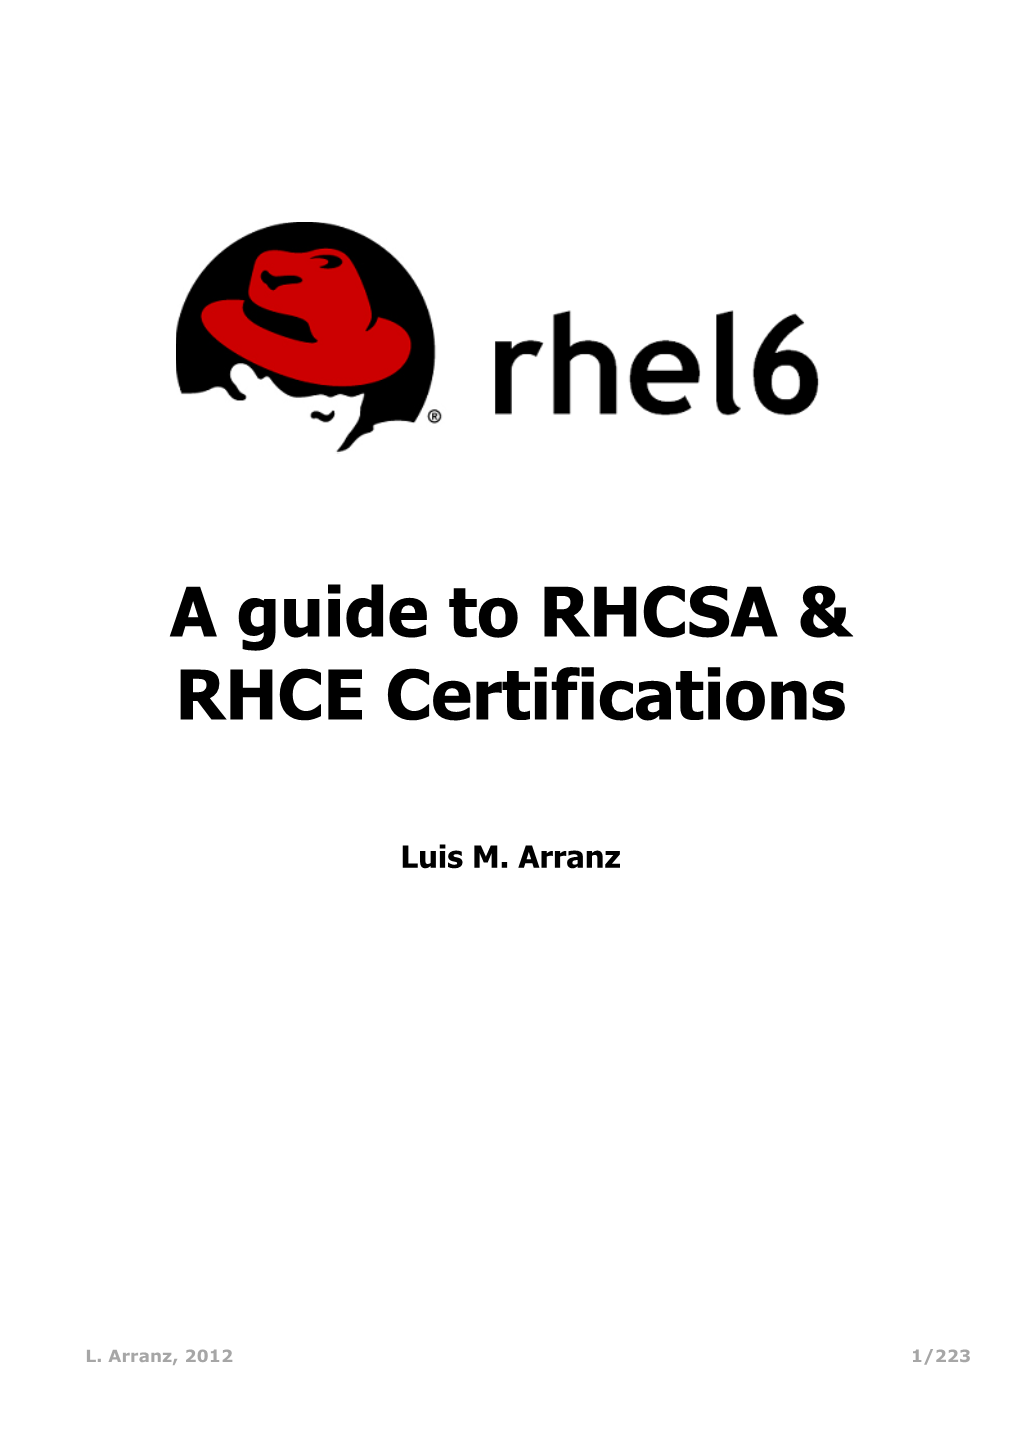 A Guide to RHCSA & RHCE Certifications